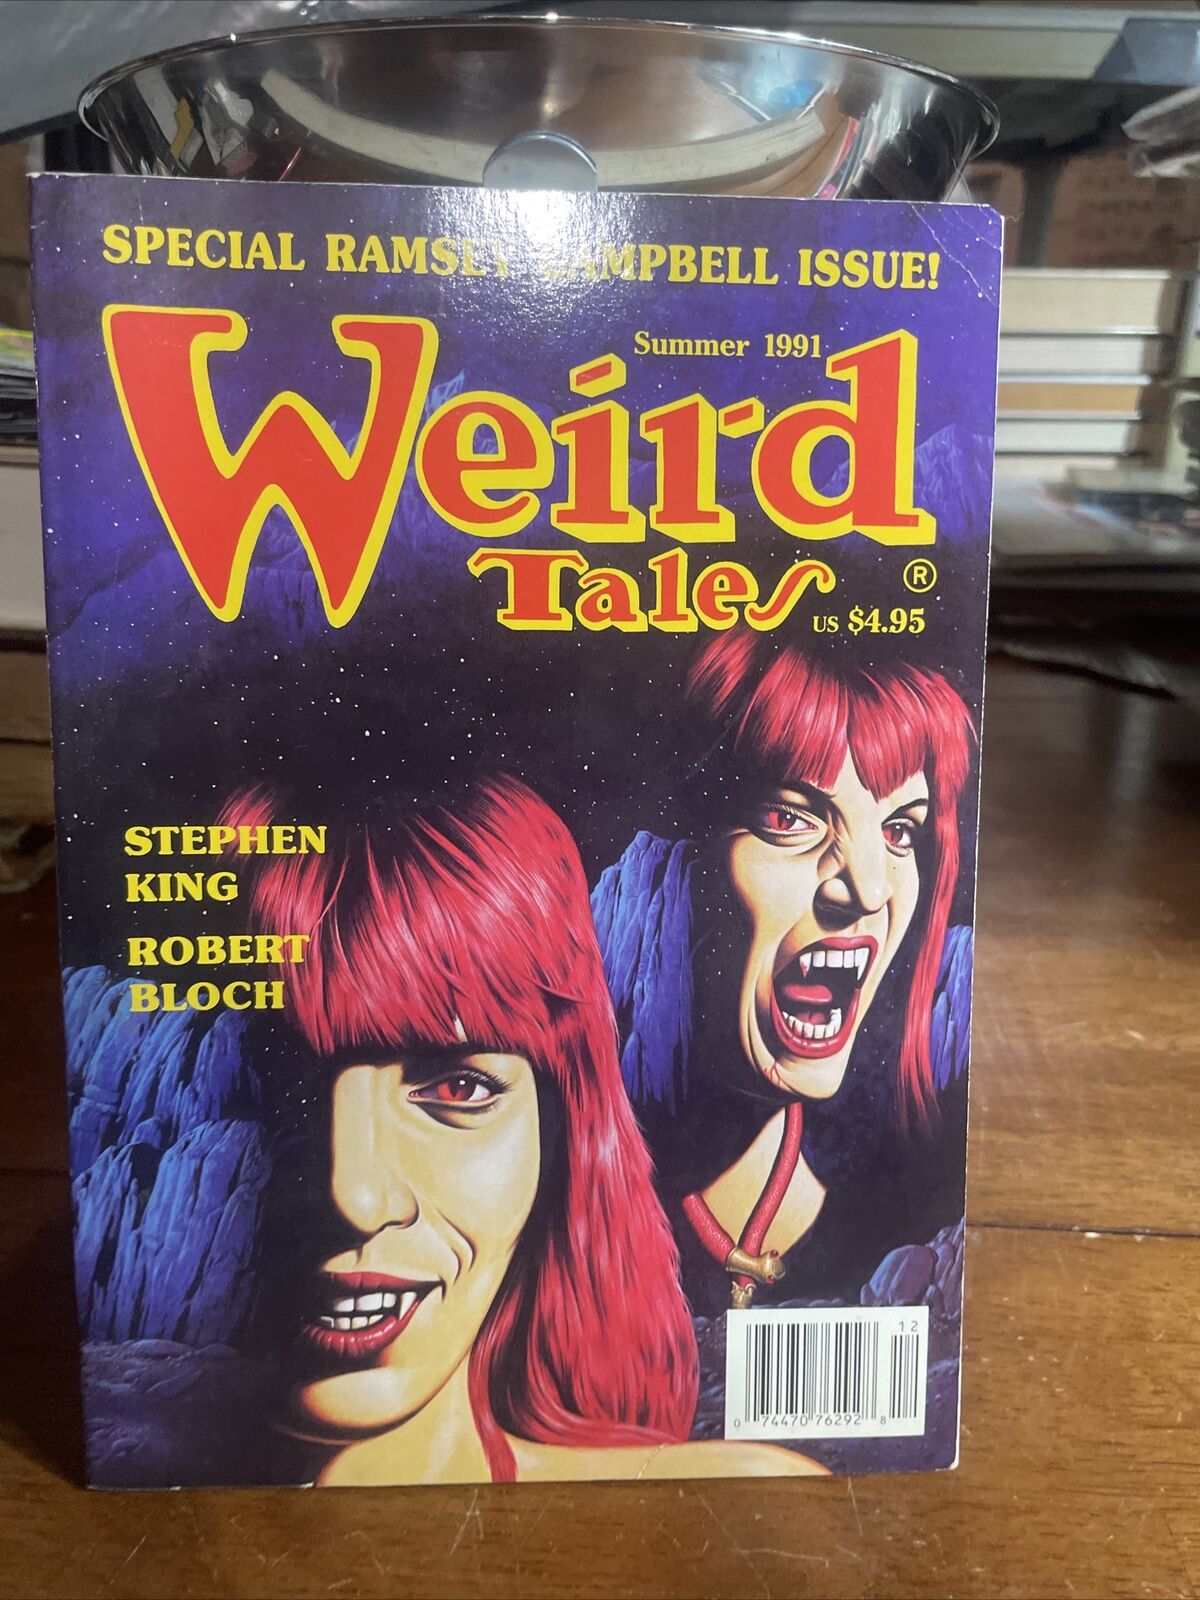 WEIRD TALES SUMMER 1991 NO. 301 Ramsey Campbell Issue + Stephen King